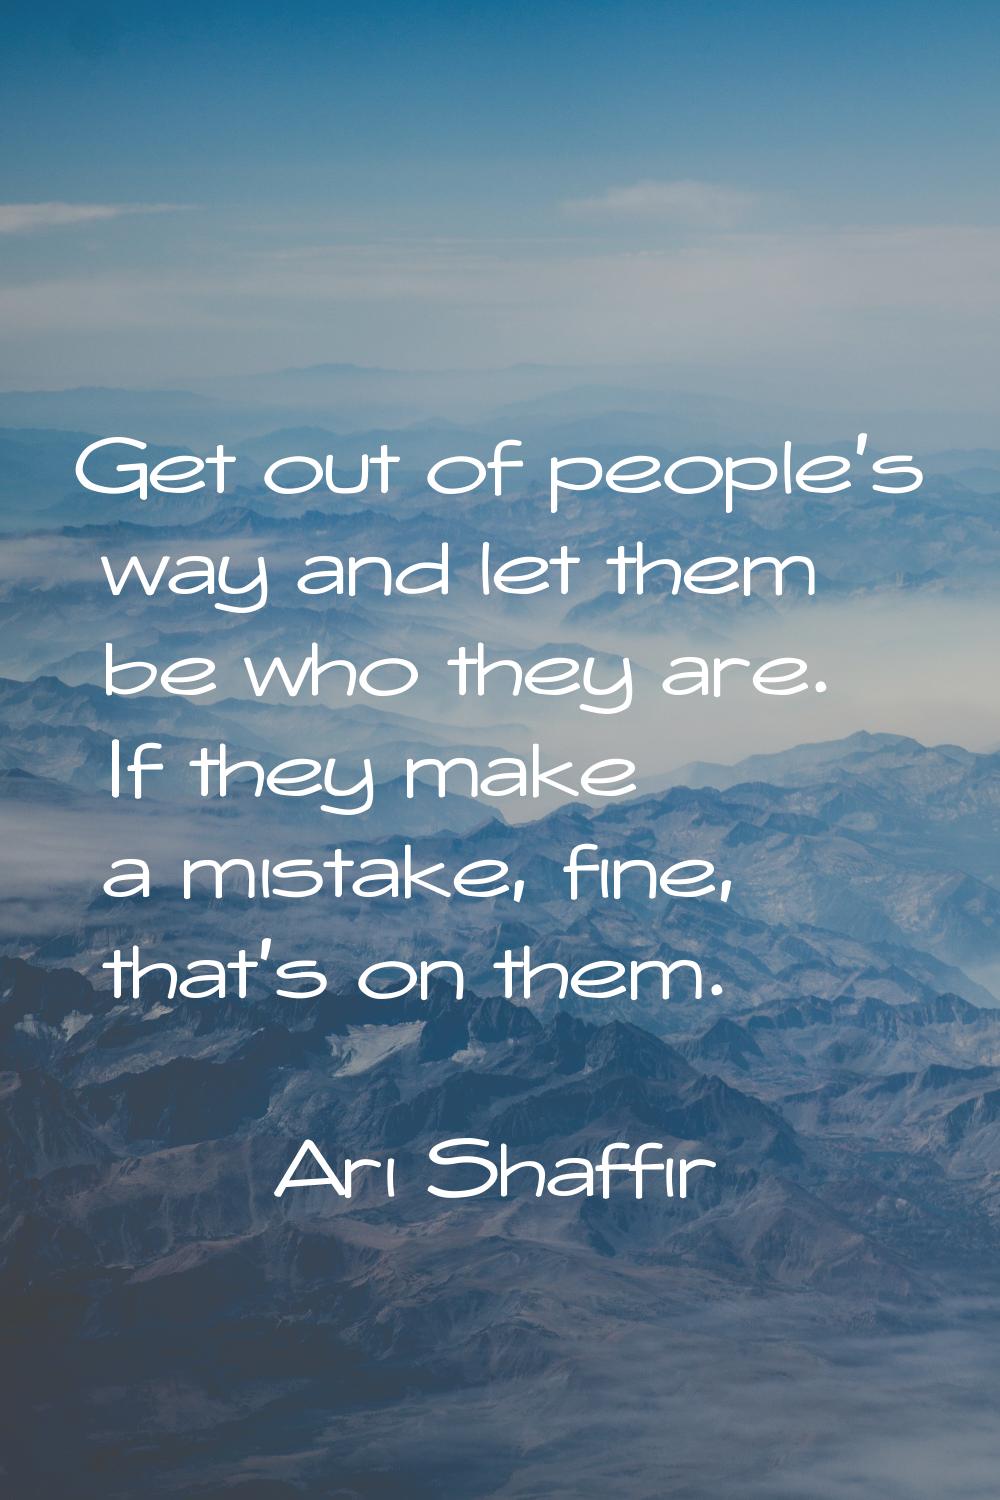 Get out of people's way and let them be who they are. If they make a mistake, fine, that's on them.